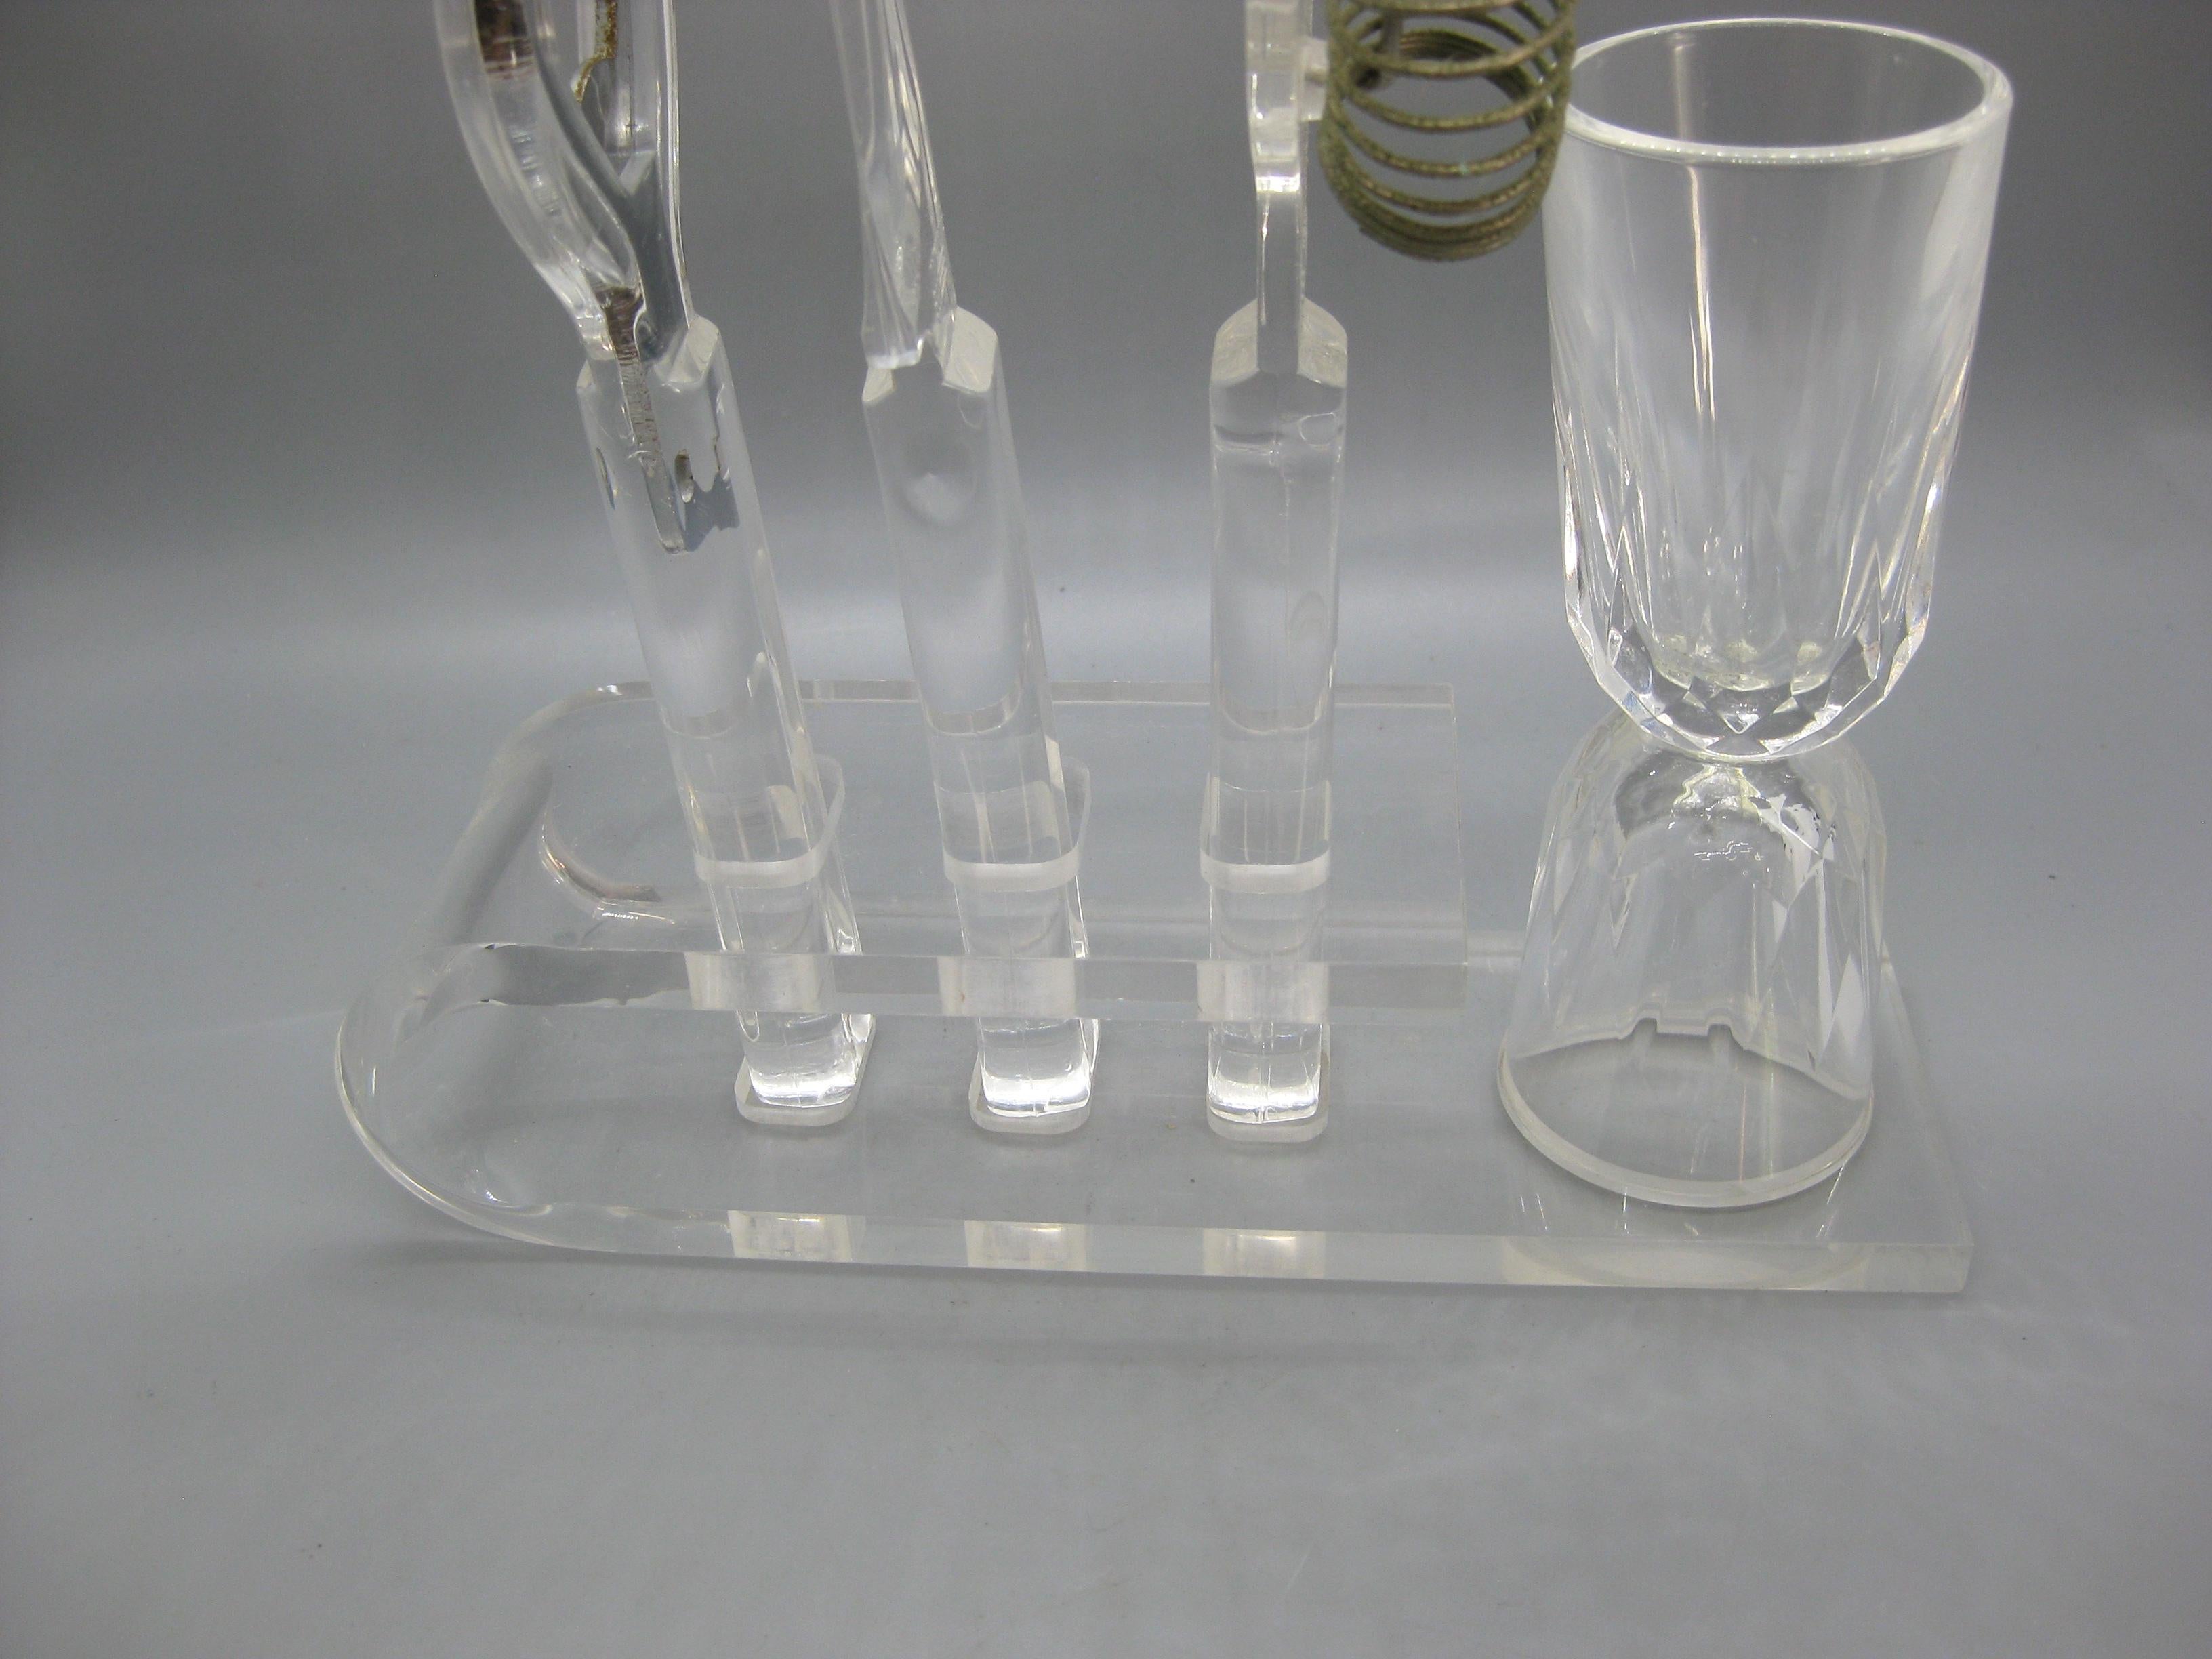 Vintage 1970's Lucite Acrylic Bar Tool Set Barware Serving Pieces w/Caddy In Good Condition For Sale In San Diego, CA